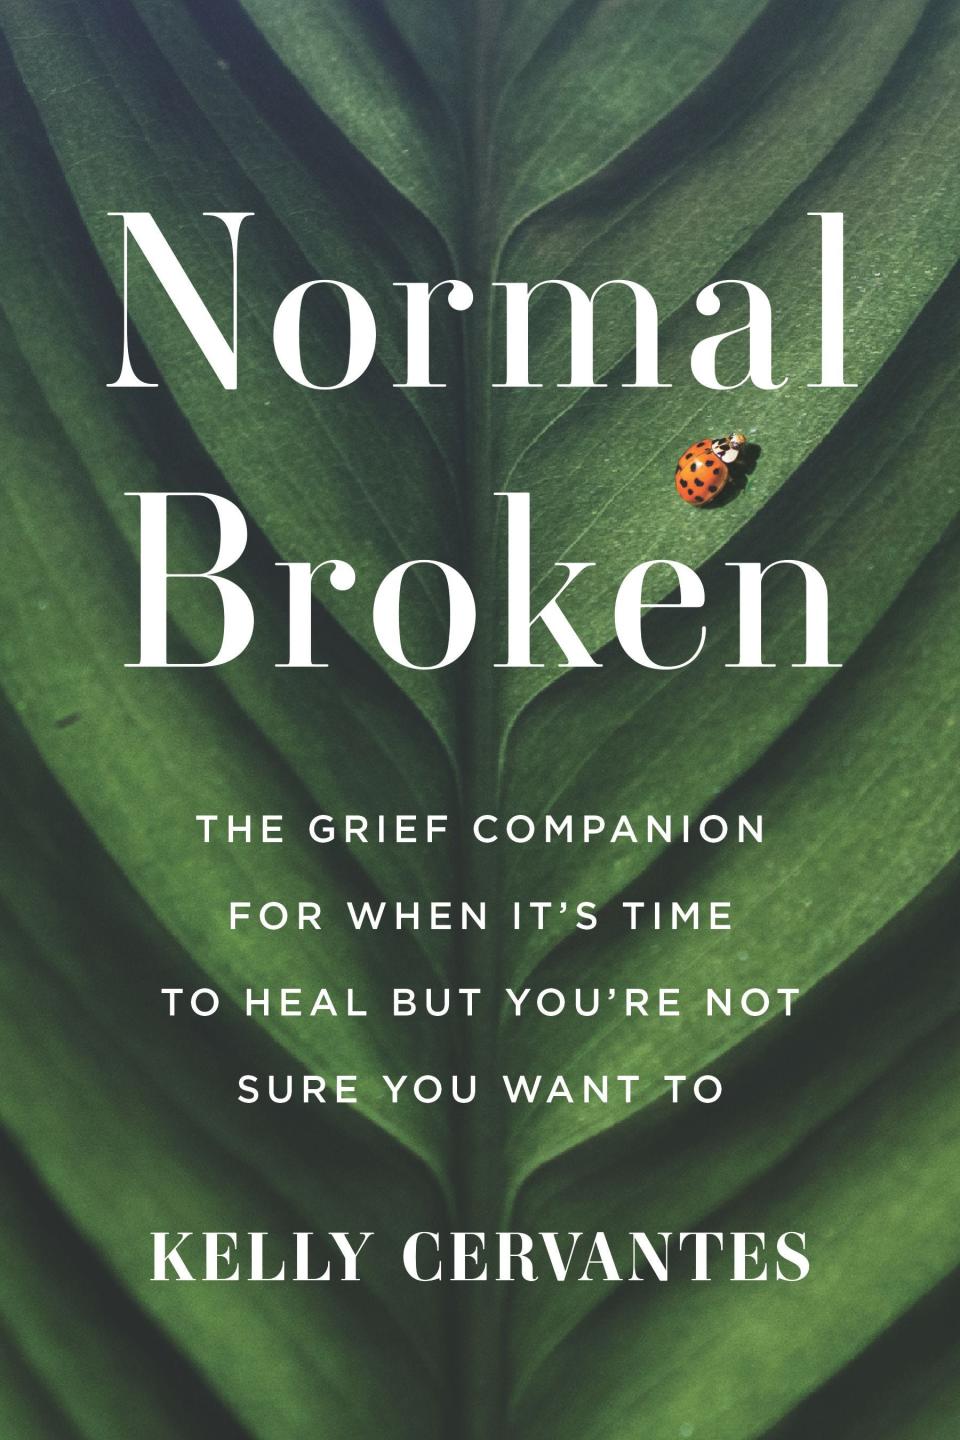 "Normal Broken" is Kelly Cervantes' book, built from her blog Inchstones, writing that guided her through grief. Cervantes will be at Ernest and Hadley Booksellers, 1928 Seventh St. in downtown Tucaloosa, 5:30-7 p.m. Thursday.